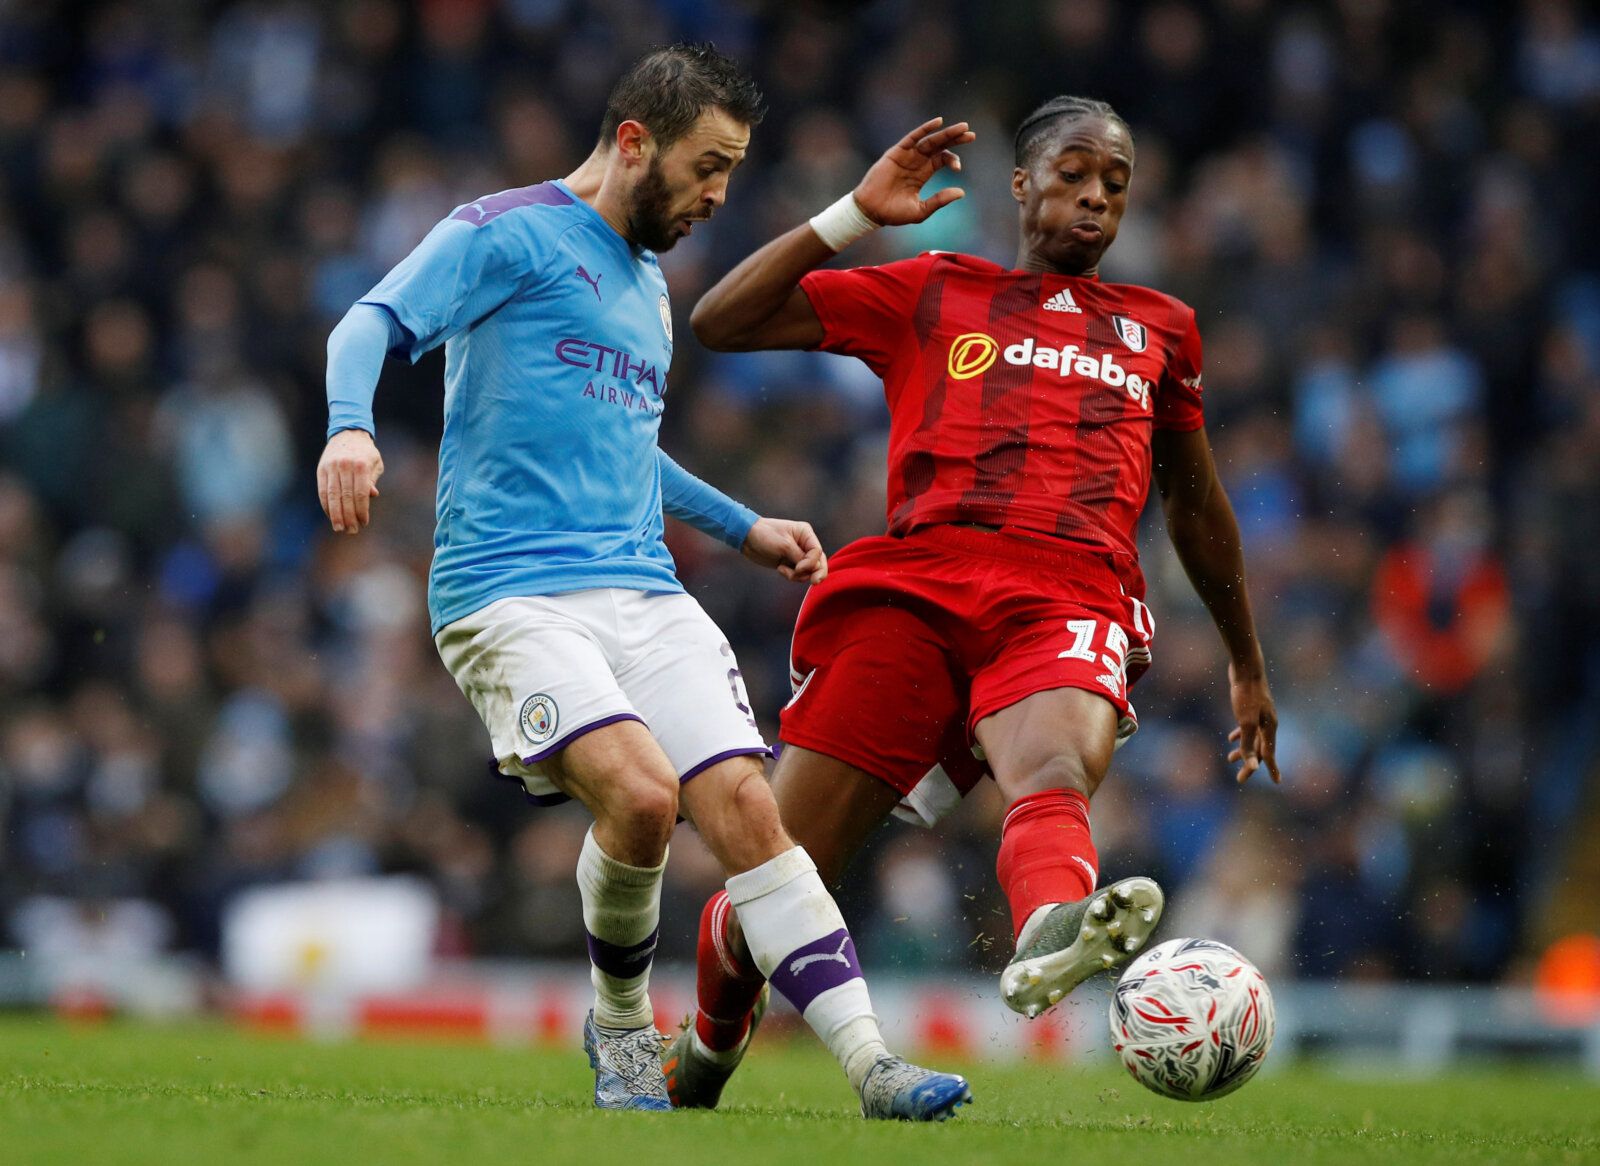 Soccer Football - FA Cup Fourth Round - Manchester City v Fulham - Etihad Stadium, Manchester, Britain - January 26, 2020  Manchester City's Bernardo Silva in action with Fulham's Terence Kongolo  REUTERS/Phil Noble